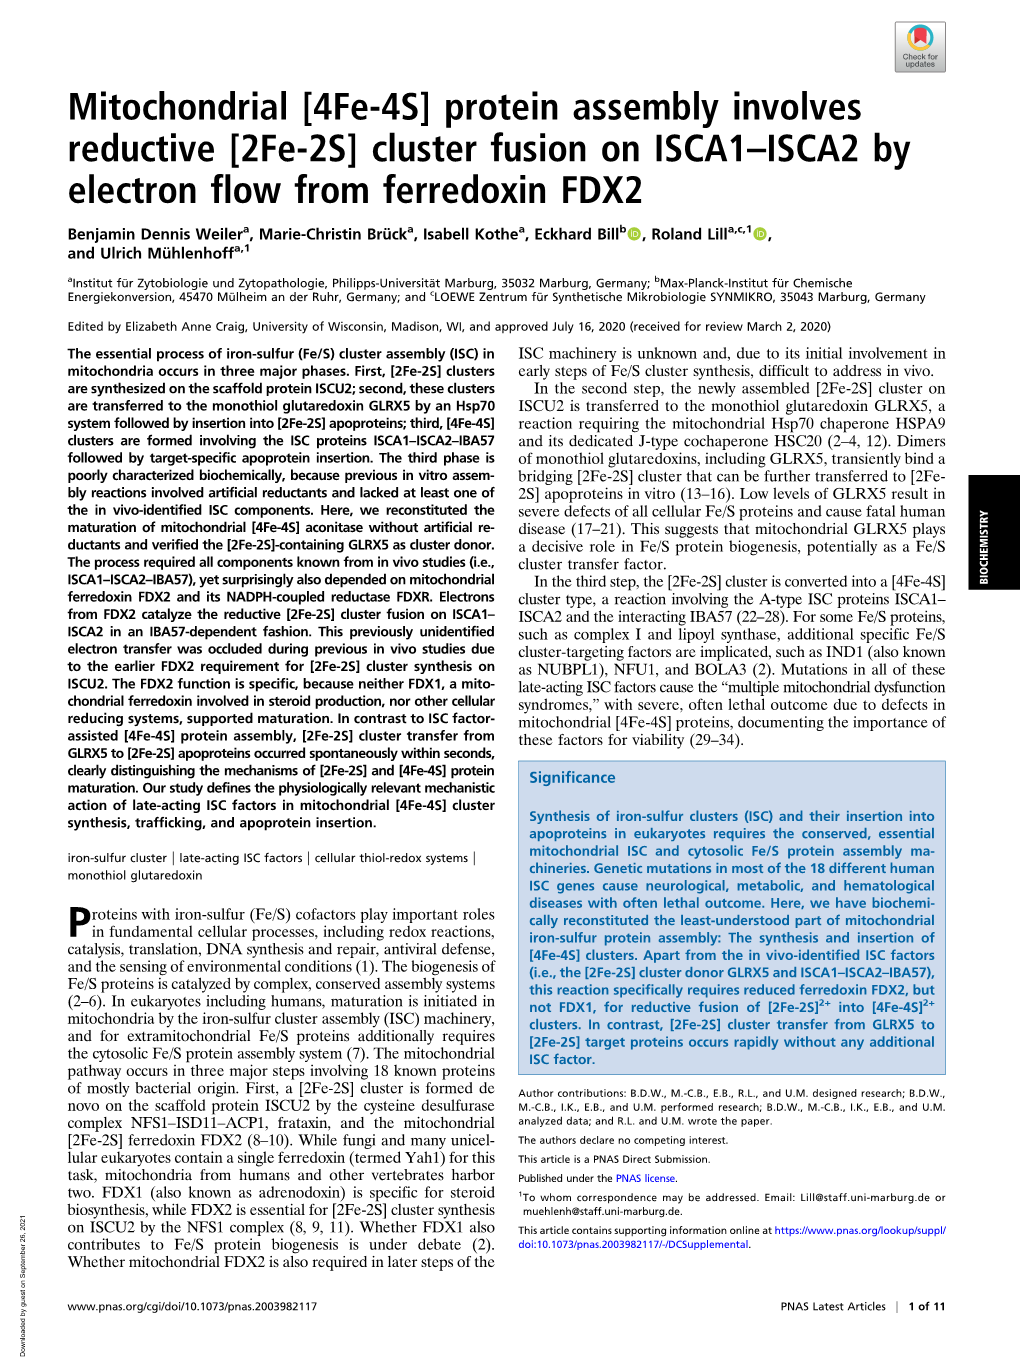 [2Fe-2S] Cluster Fusion on ISCA1–ISCA2 by Electron Flow from Ferredoxin FDX2